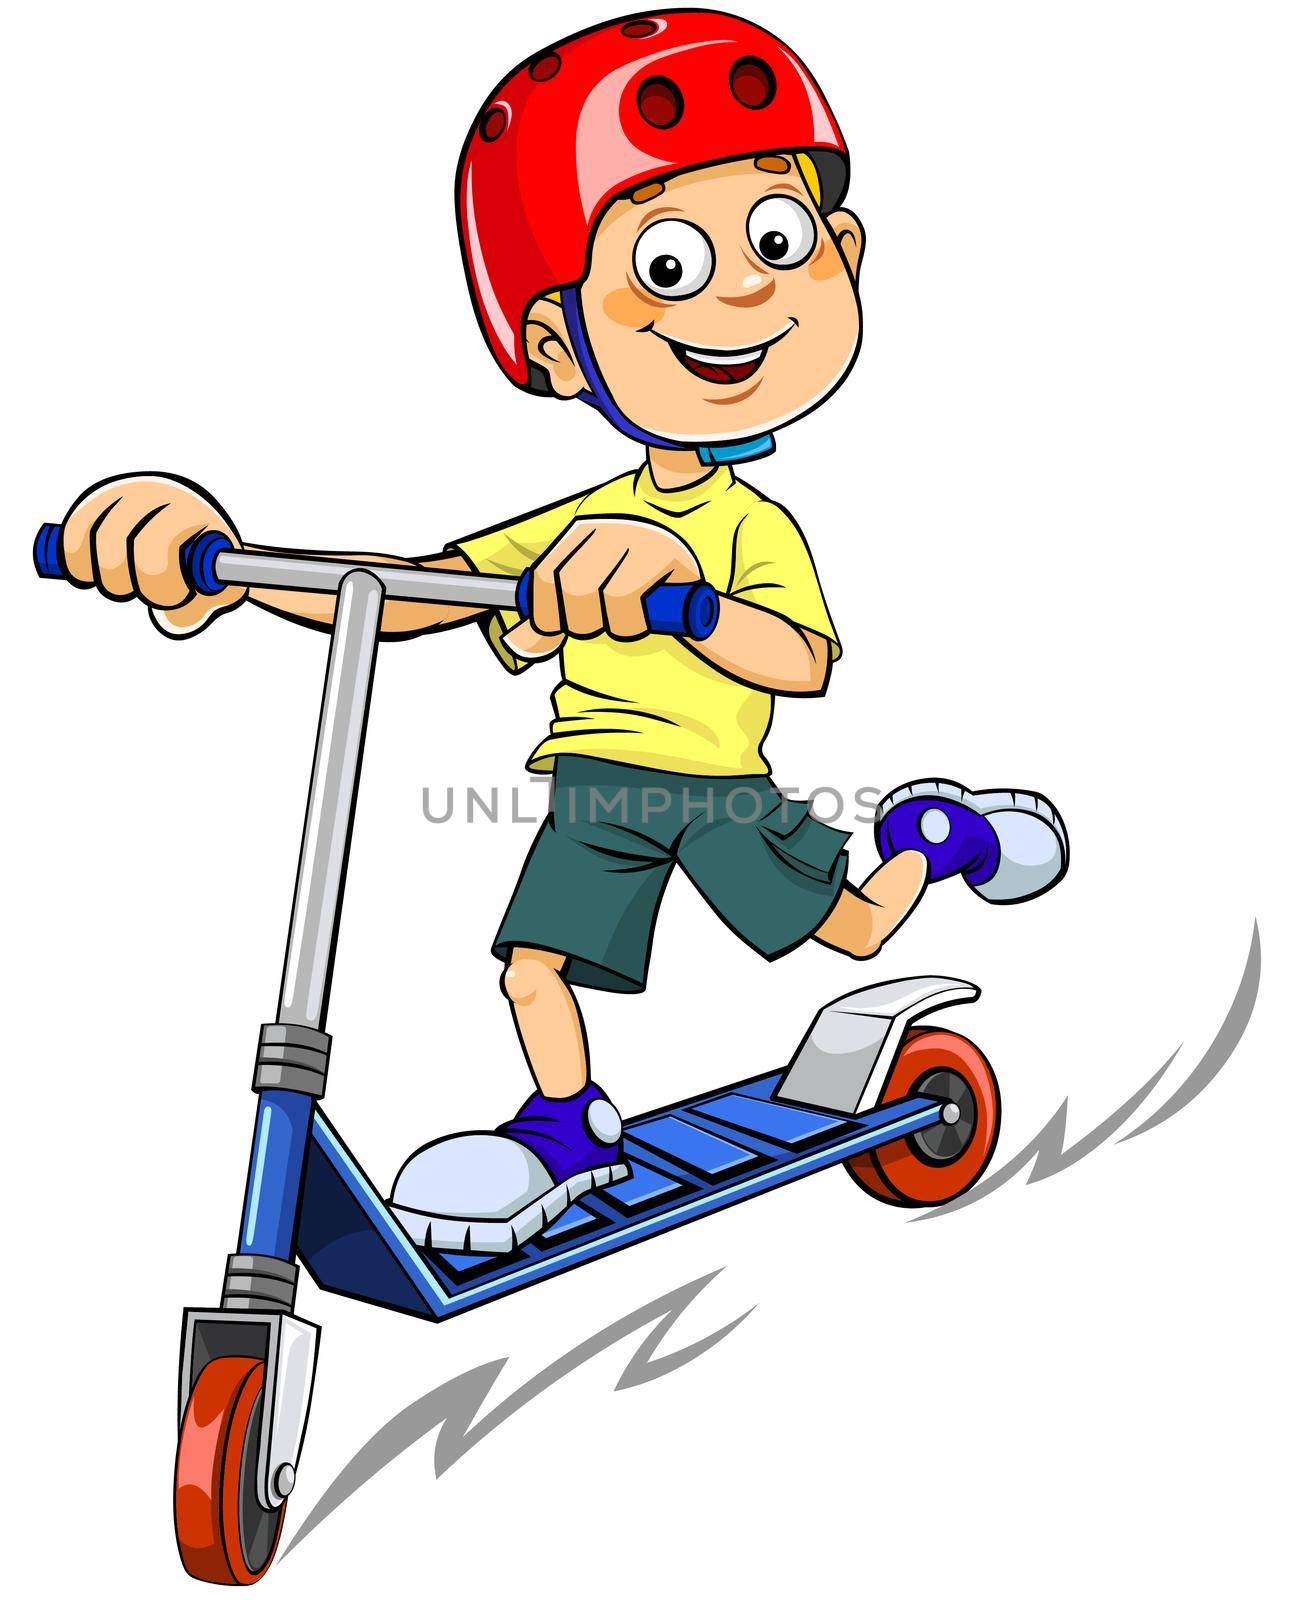 Color vector illustration of a cartoon smiling boy riding a scooter